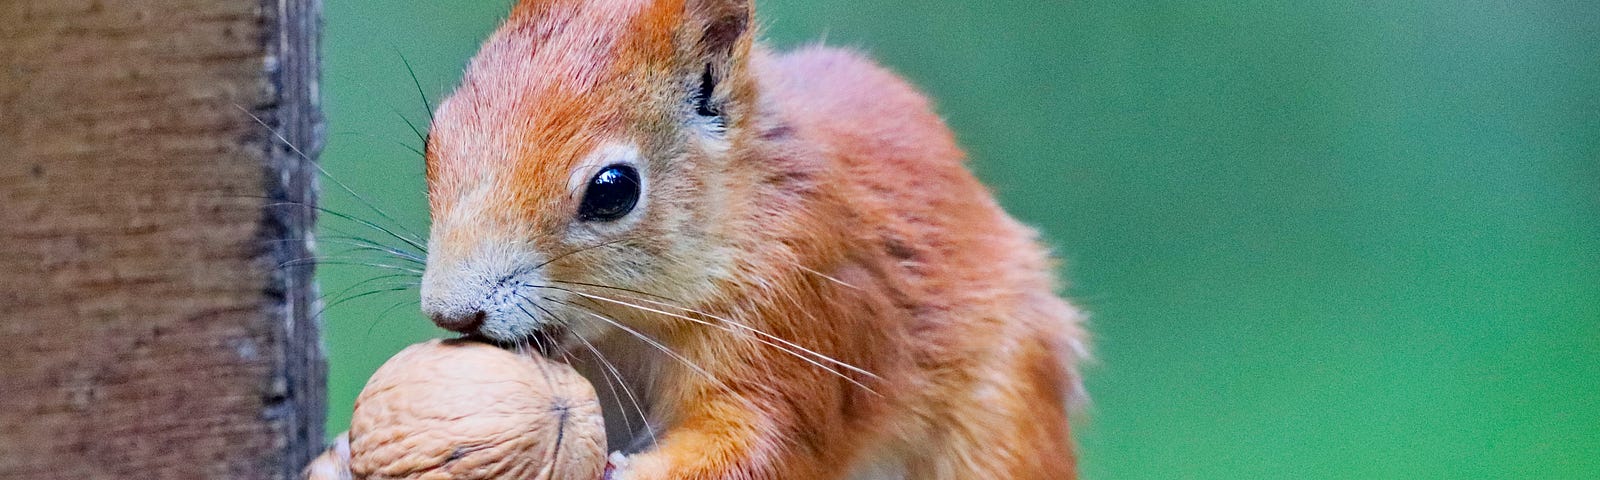 A nice auburn colored squirrel grasping a nut.